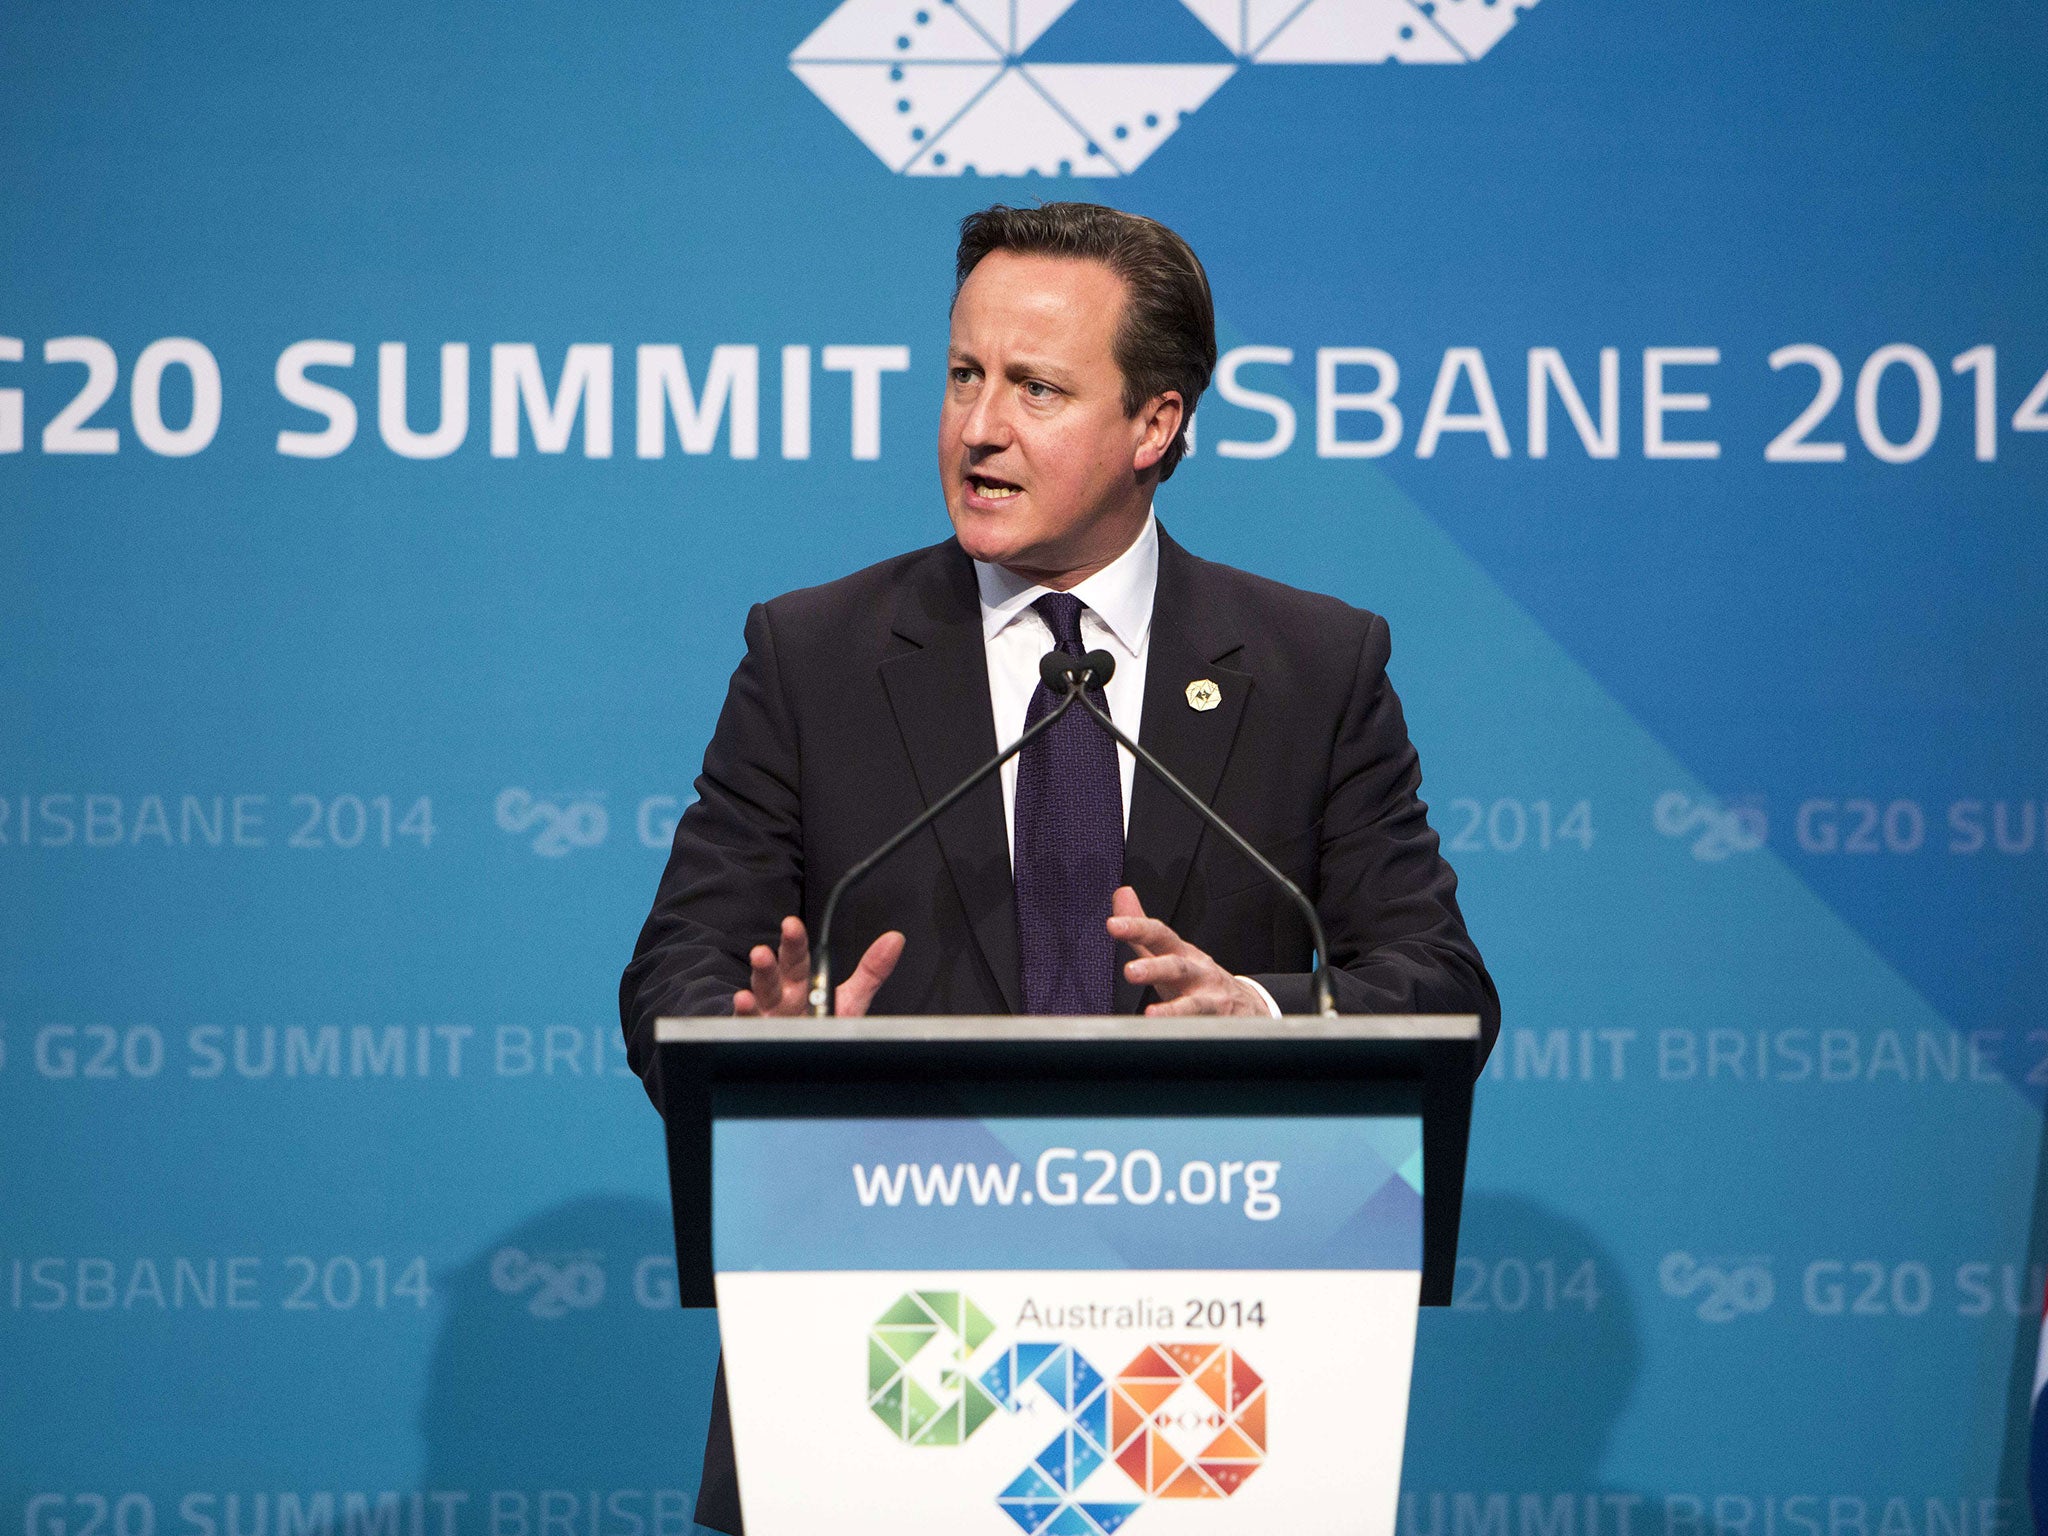 Britain's Prime Minister David Cameron speaks on the final day of the G20 Summit in Brisbane